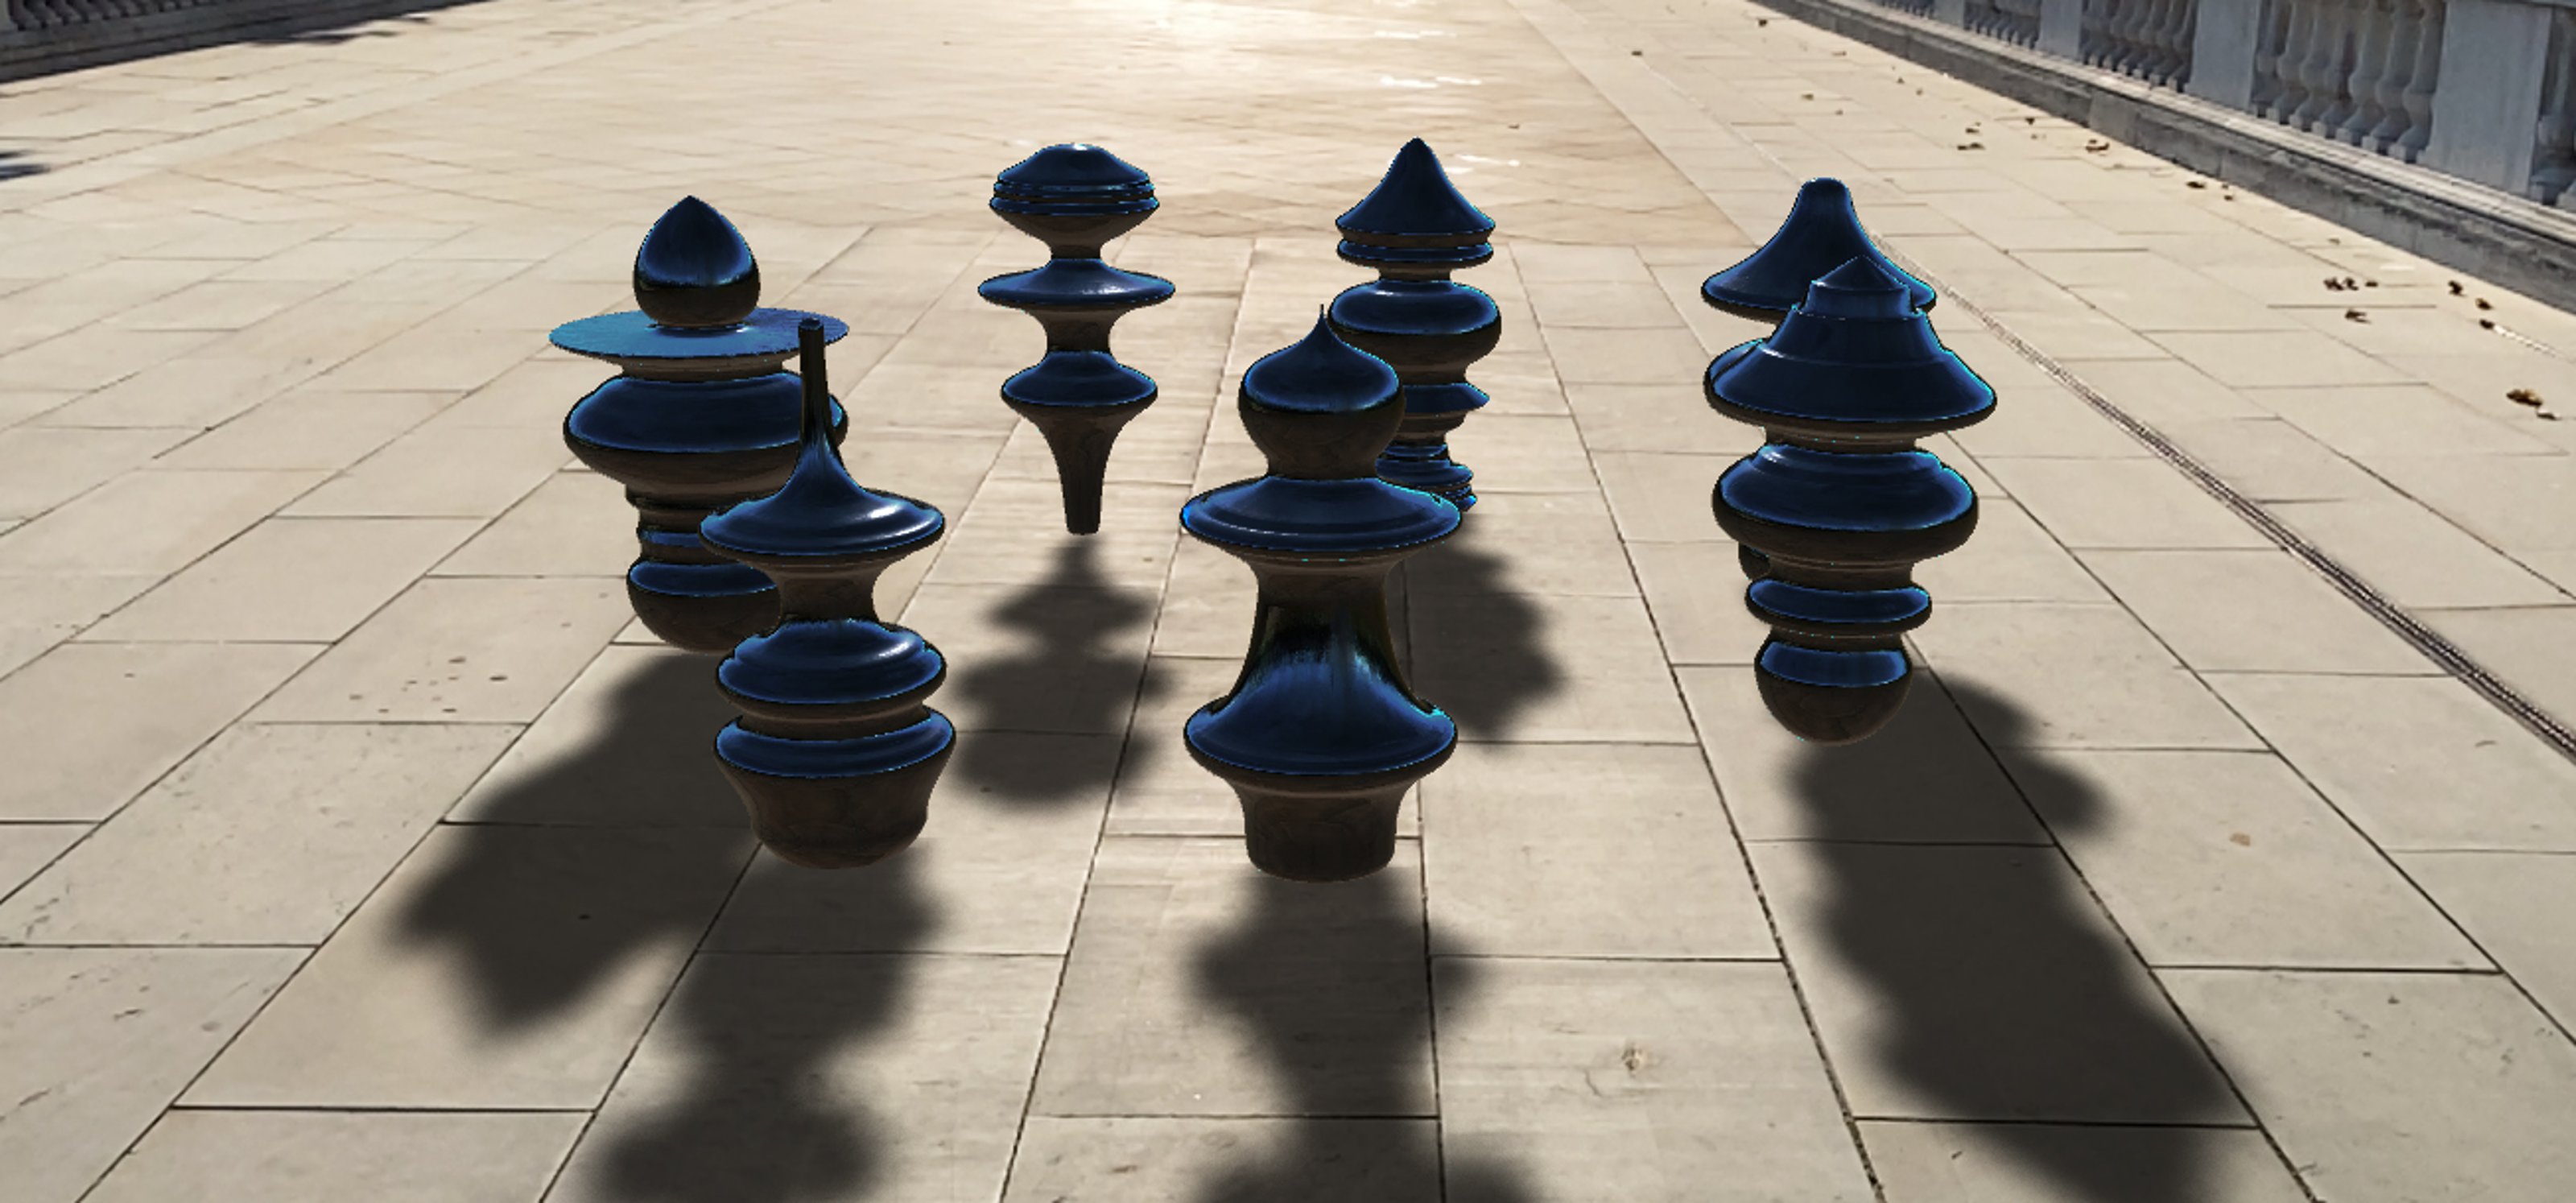 Digital chess pieces on the ground